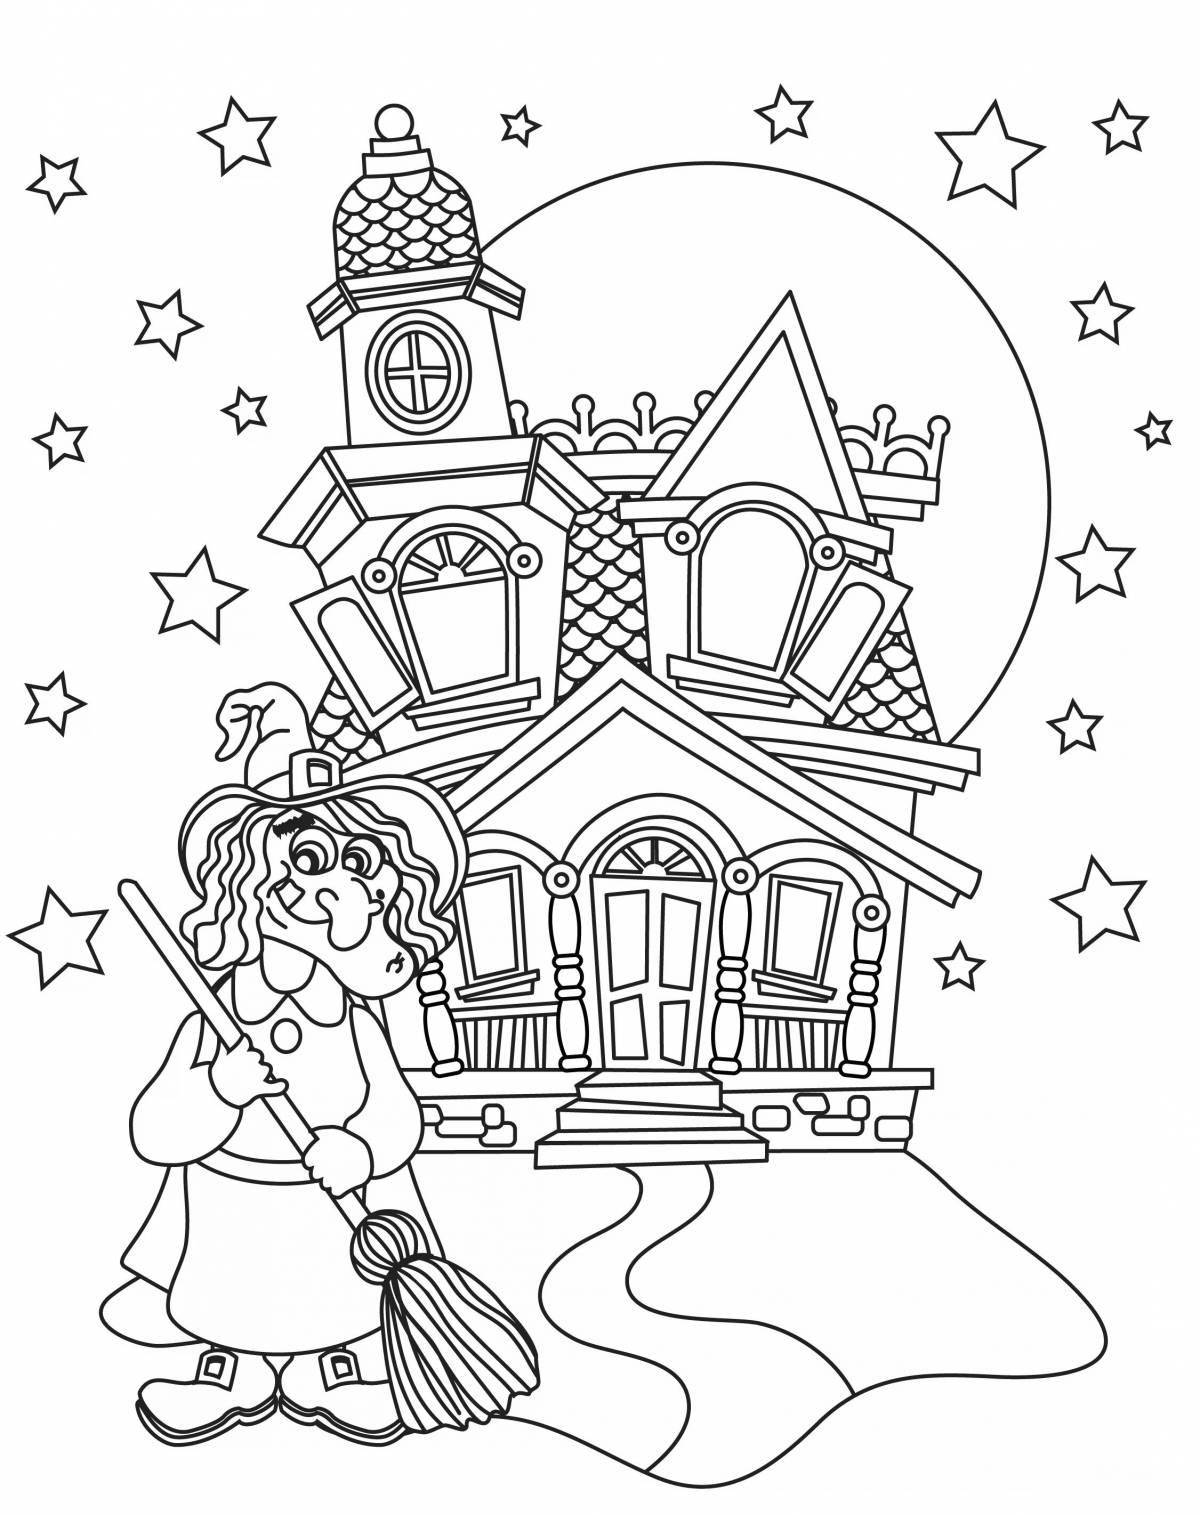 Fun castles for girls coloring